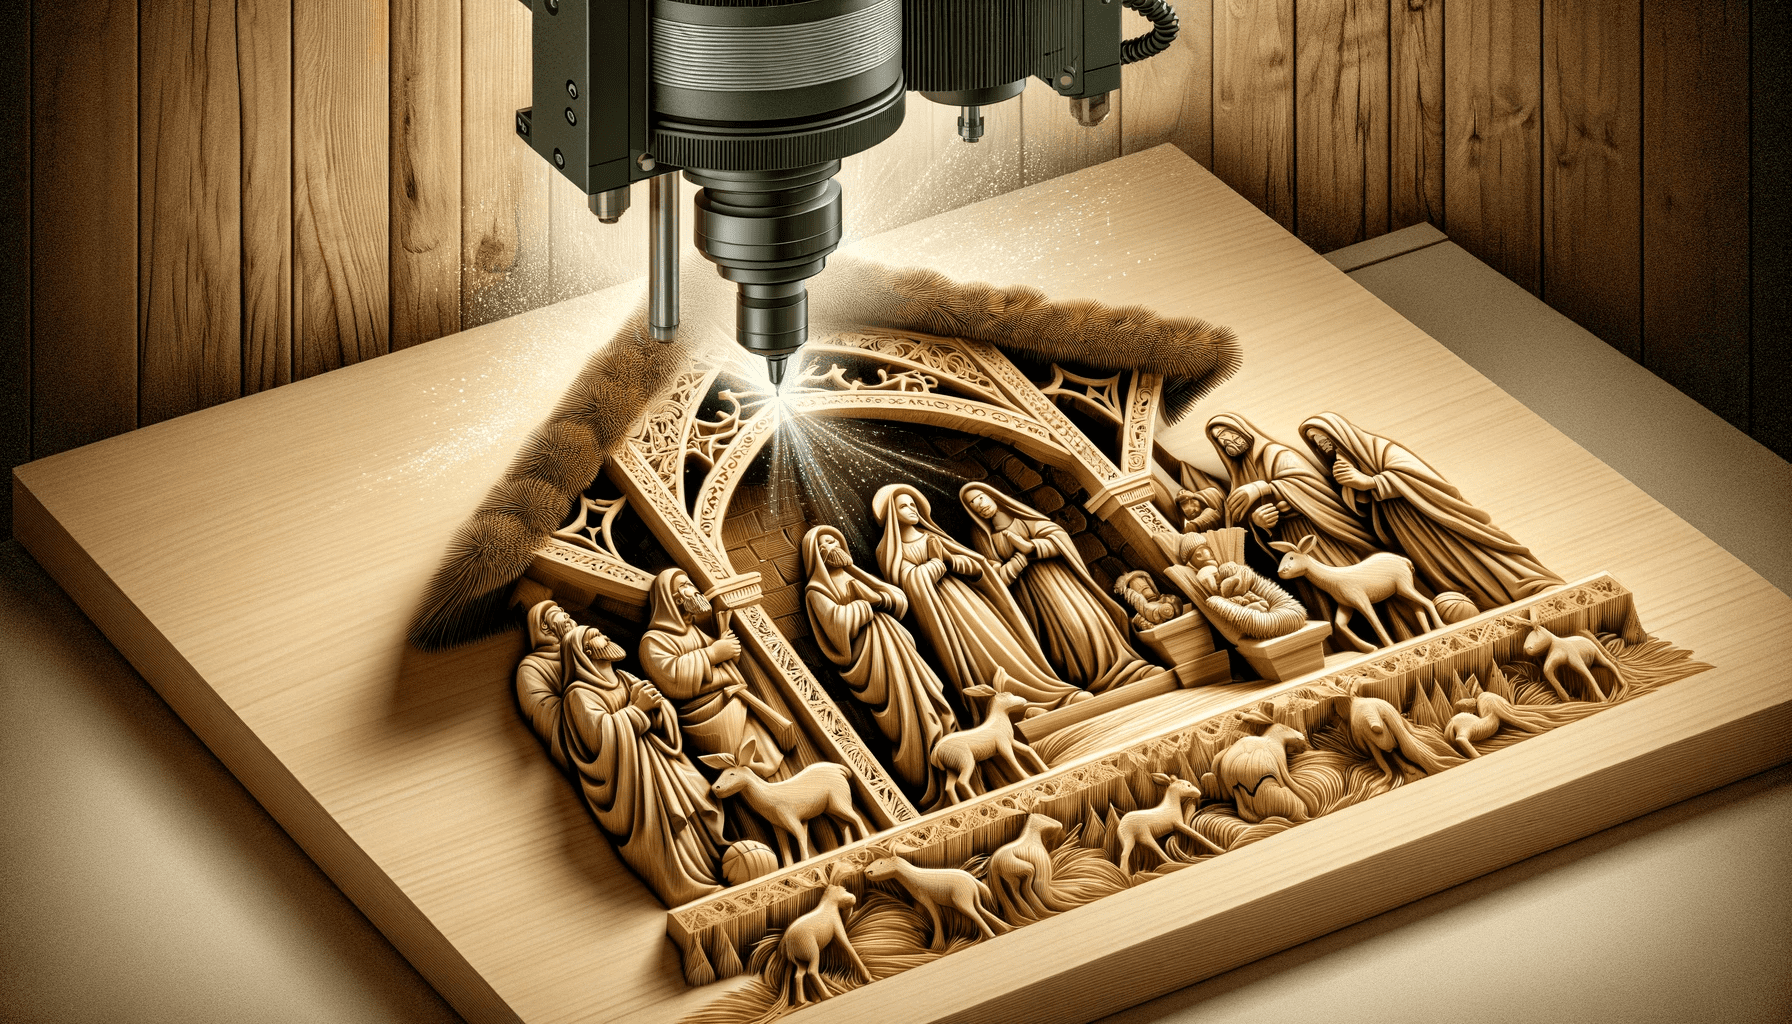 Illustration of a close-up view of a CNC carving machine as it etches fine details into wood, producing a complex nativity scene with figures and stab